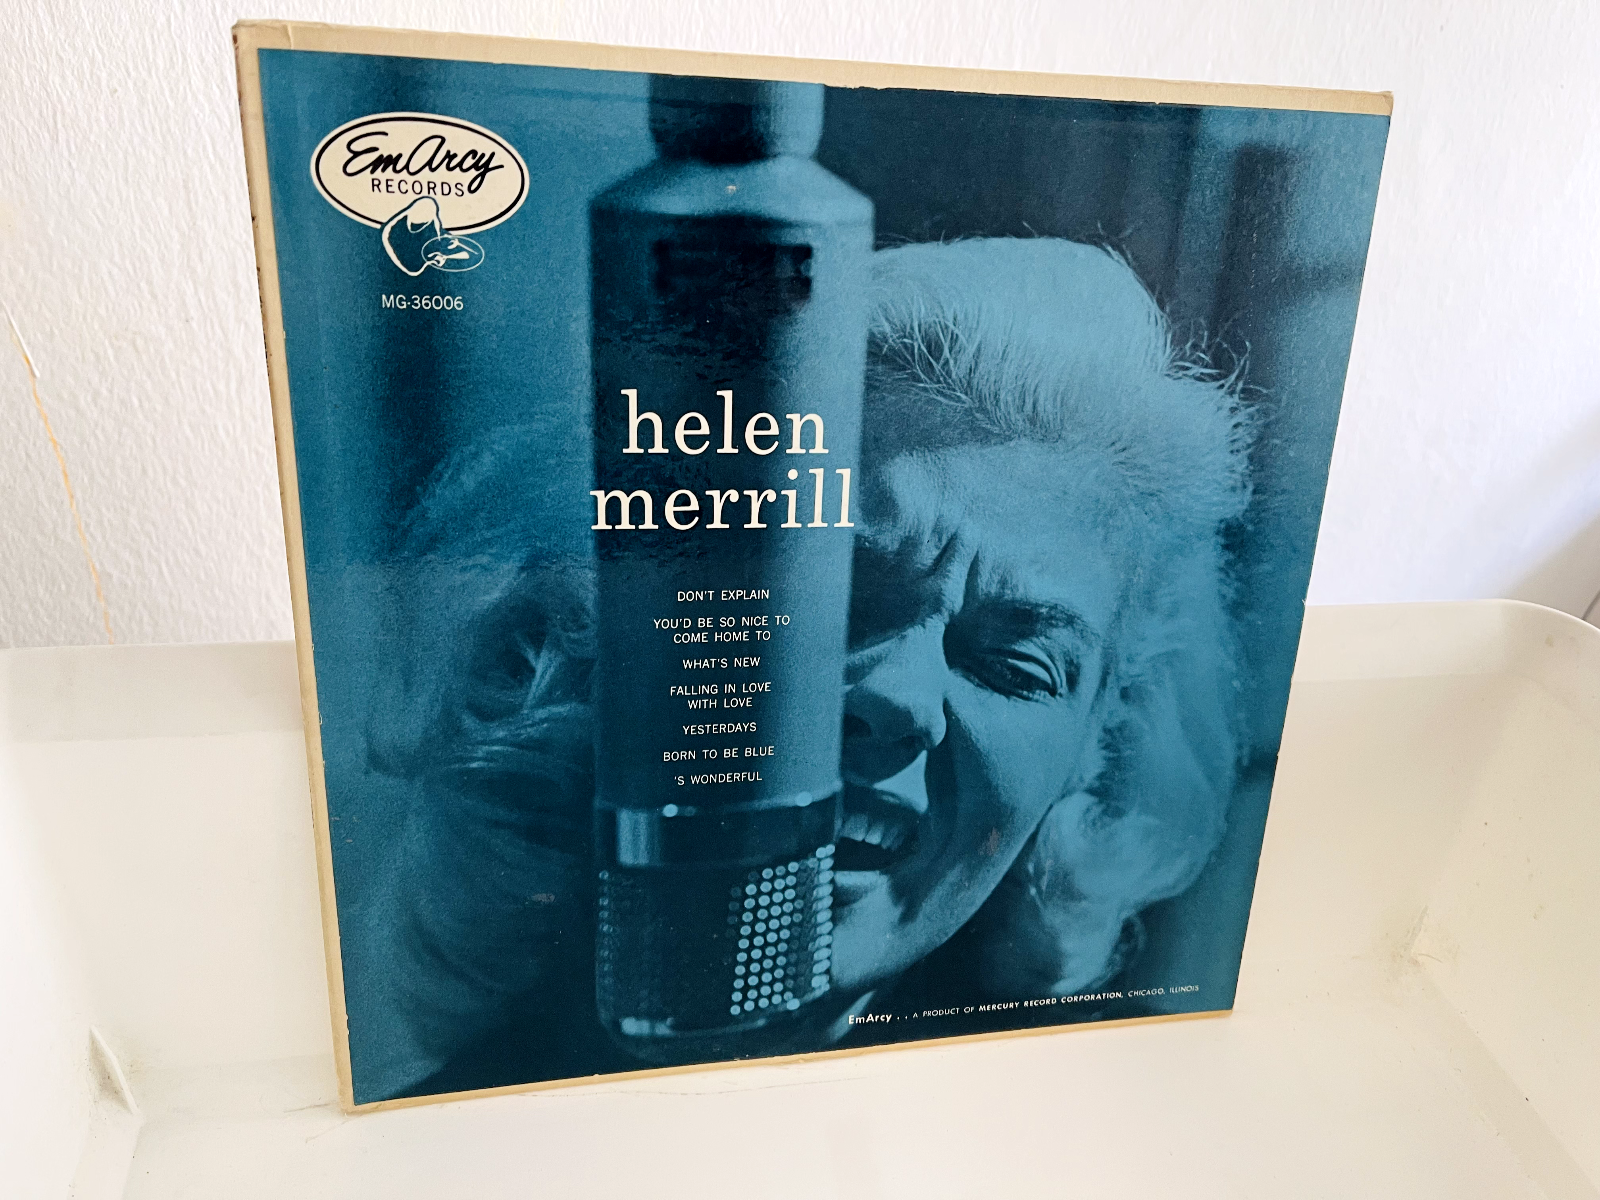 Pic 1 HELEN MERRILL - SAME - EMARCY MG 36006 - MONO - BLUE BACK  COVER - 1954 -  TOP